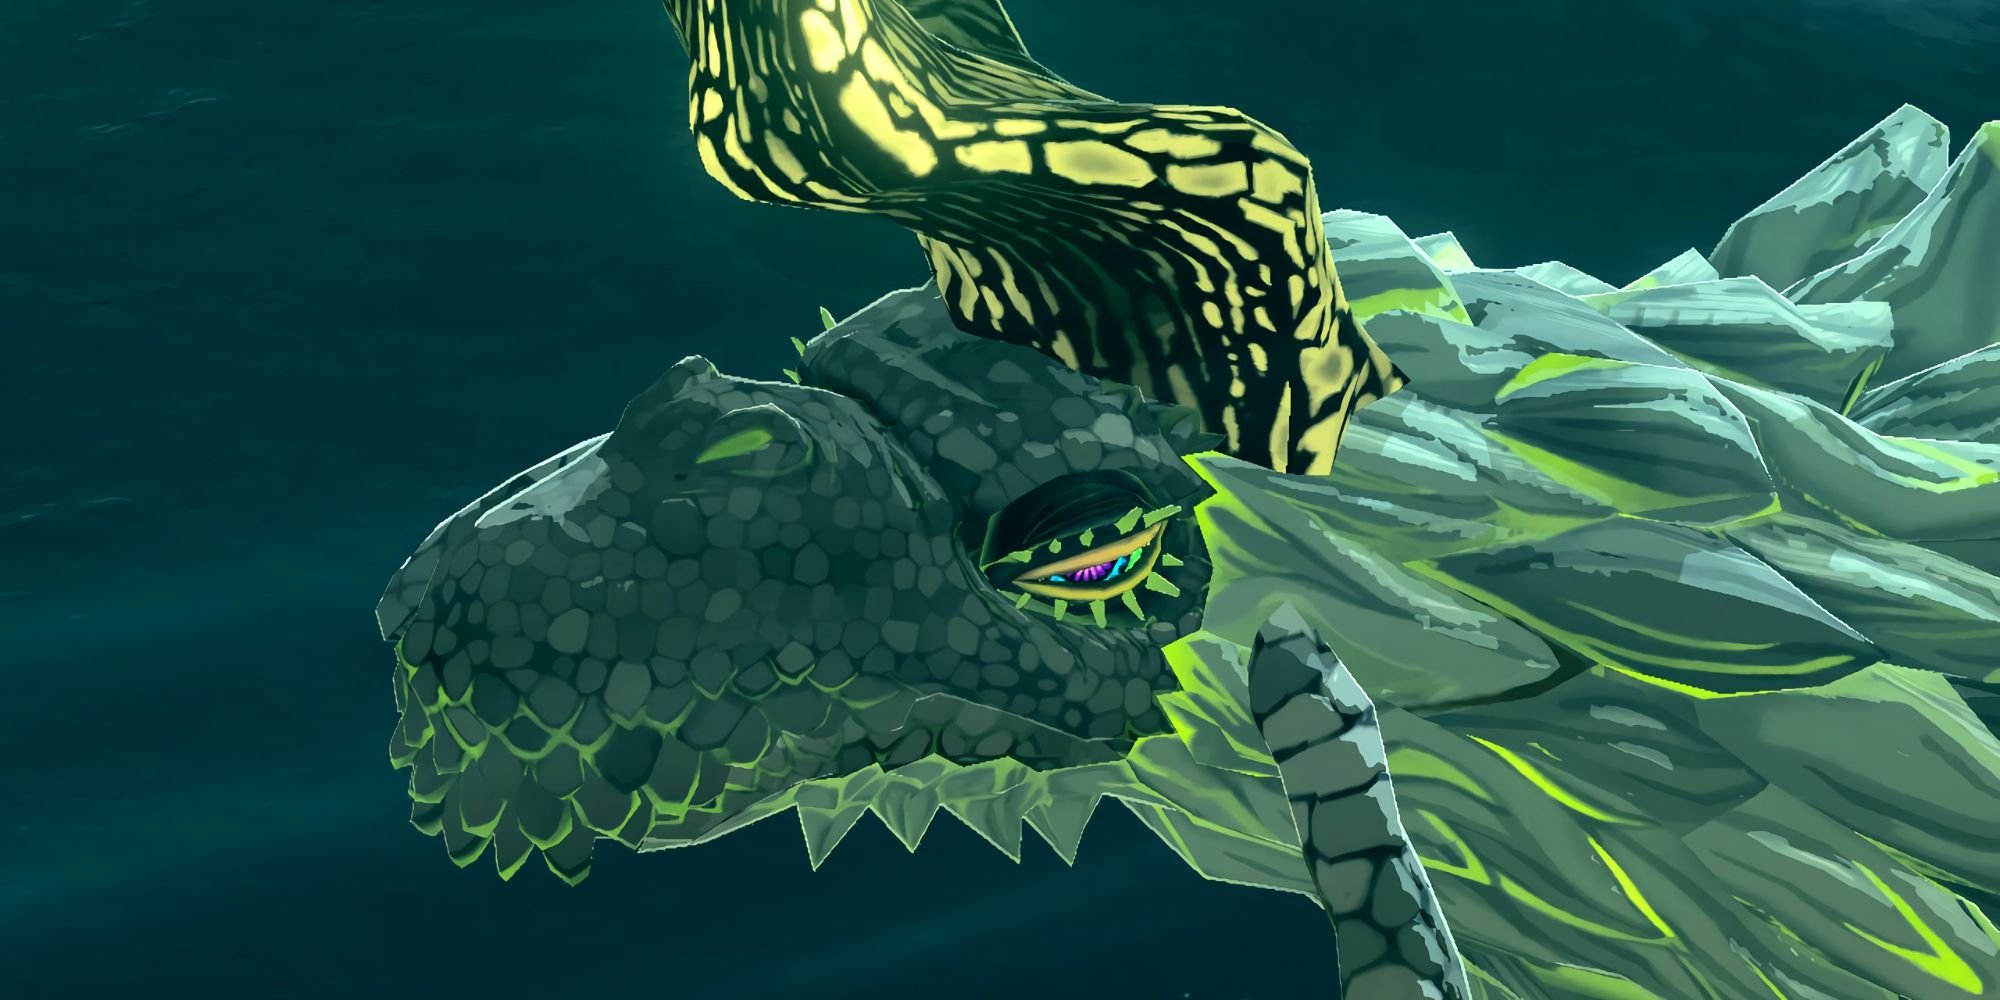 One of Breath of the Wild's dragons, Farosh, could have an impact on BOTW 2's story and gameplay.